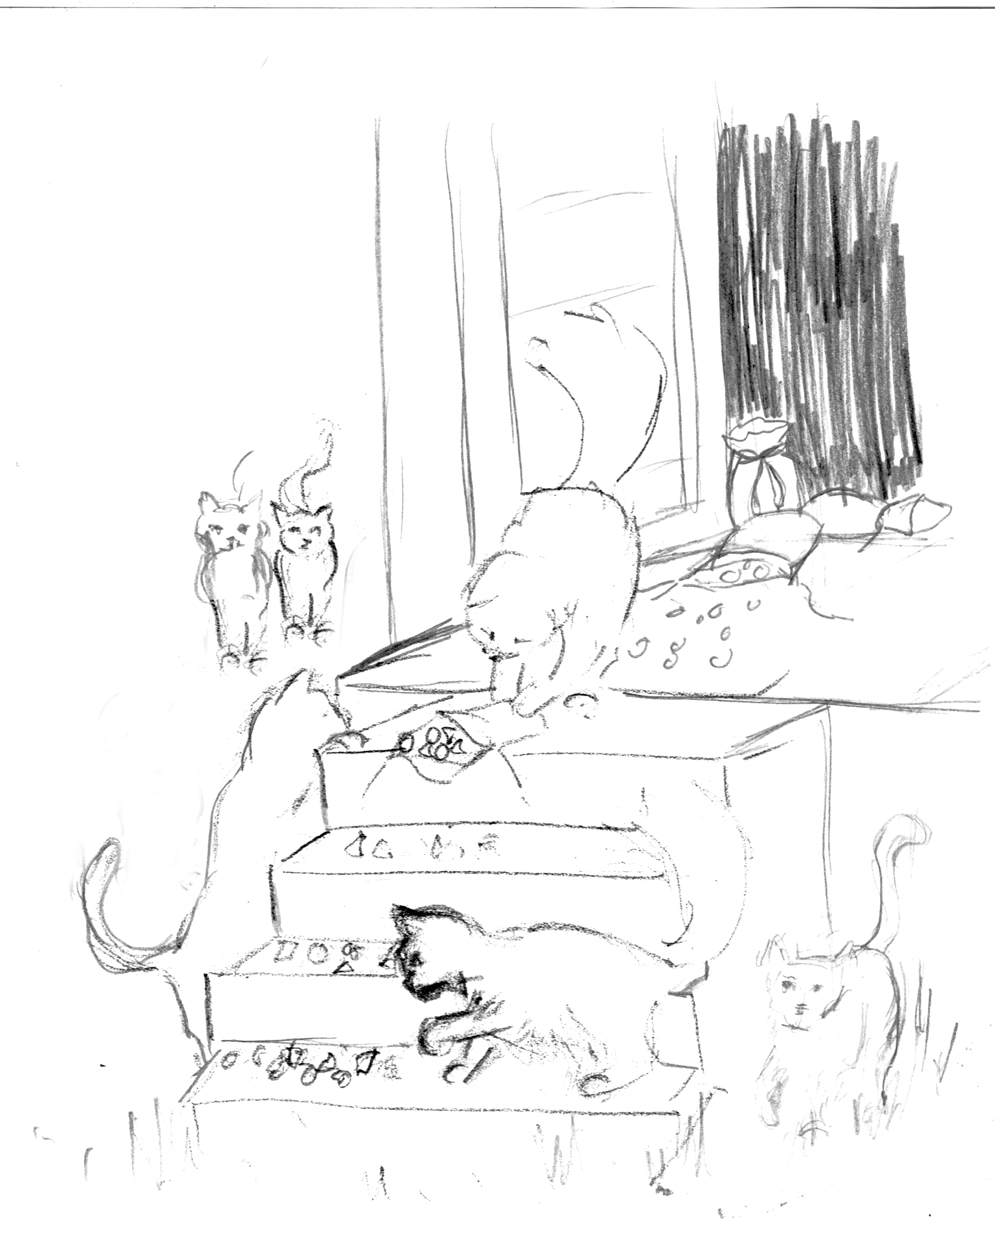 pencil sketch of cats on steps for illustration